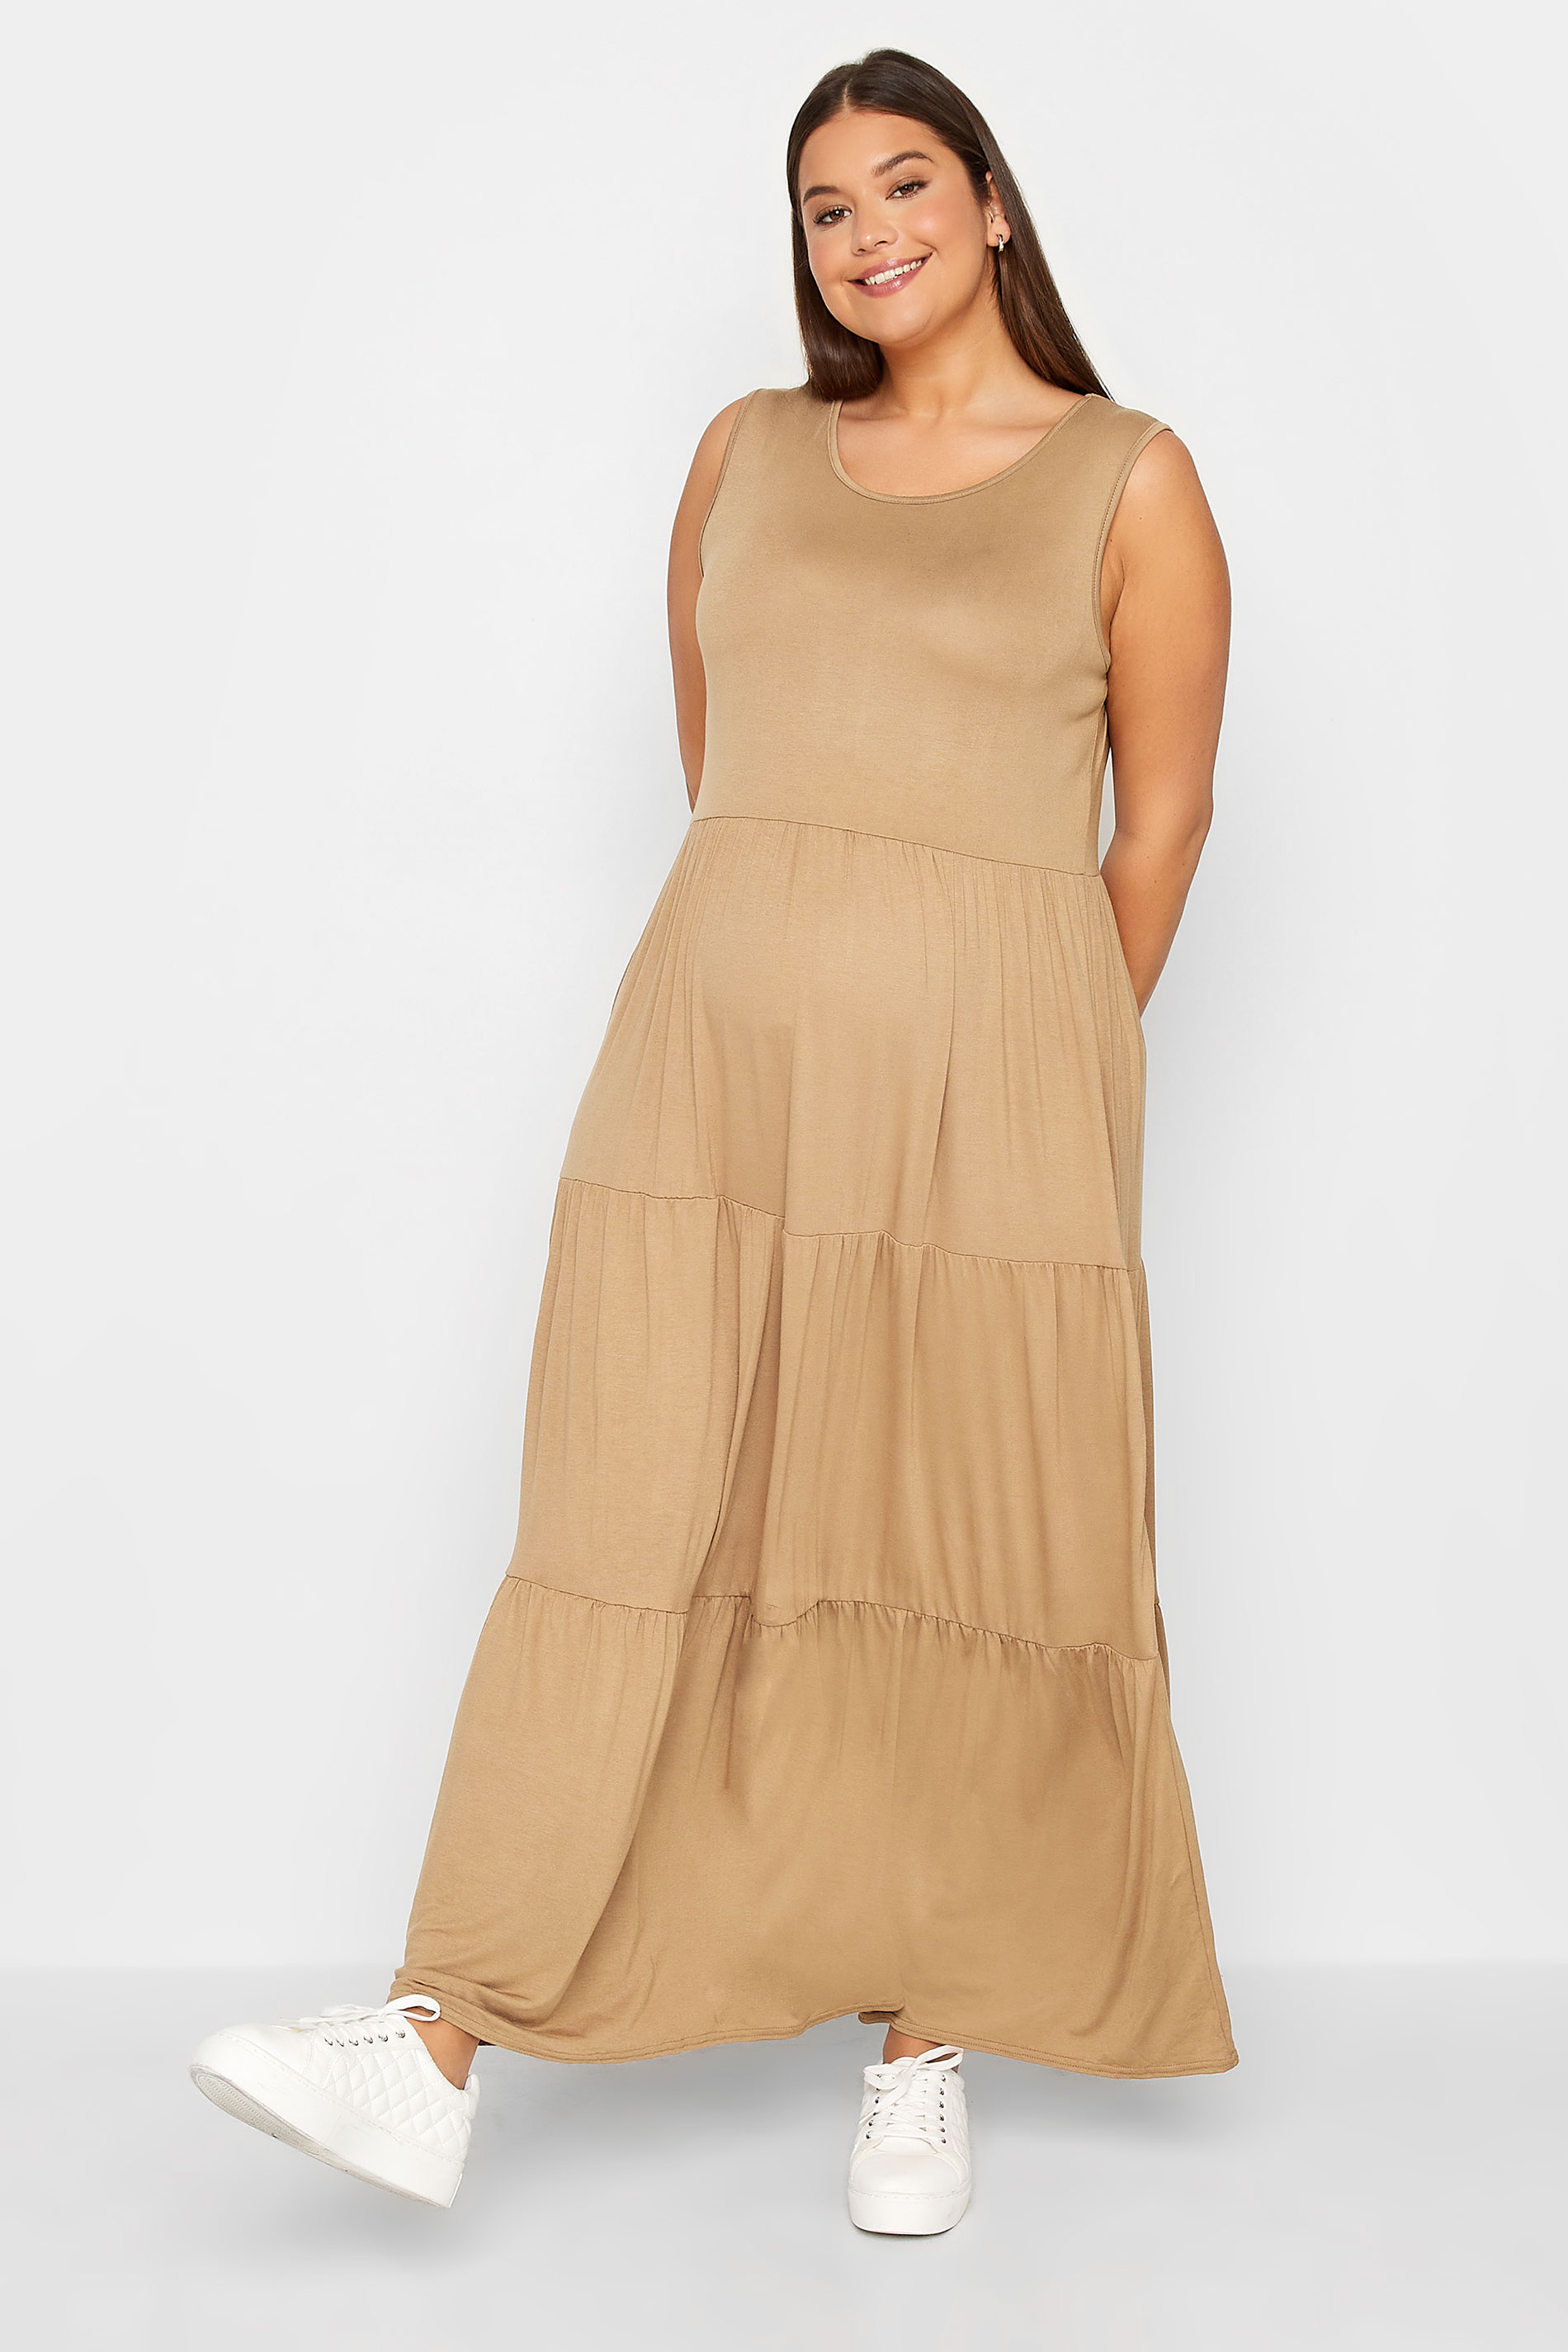 LTS Maternity Camel Brown Tiered Maxi Dress | Long Tall Sally  1